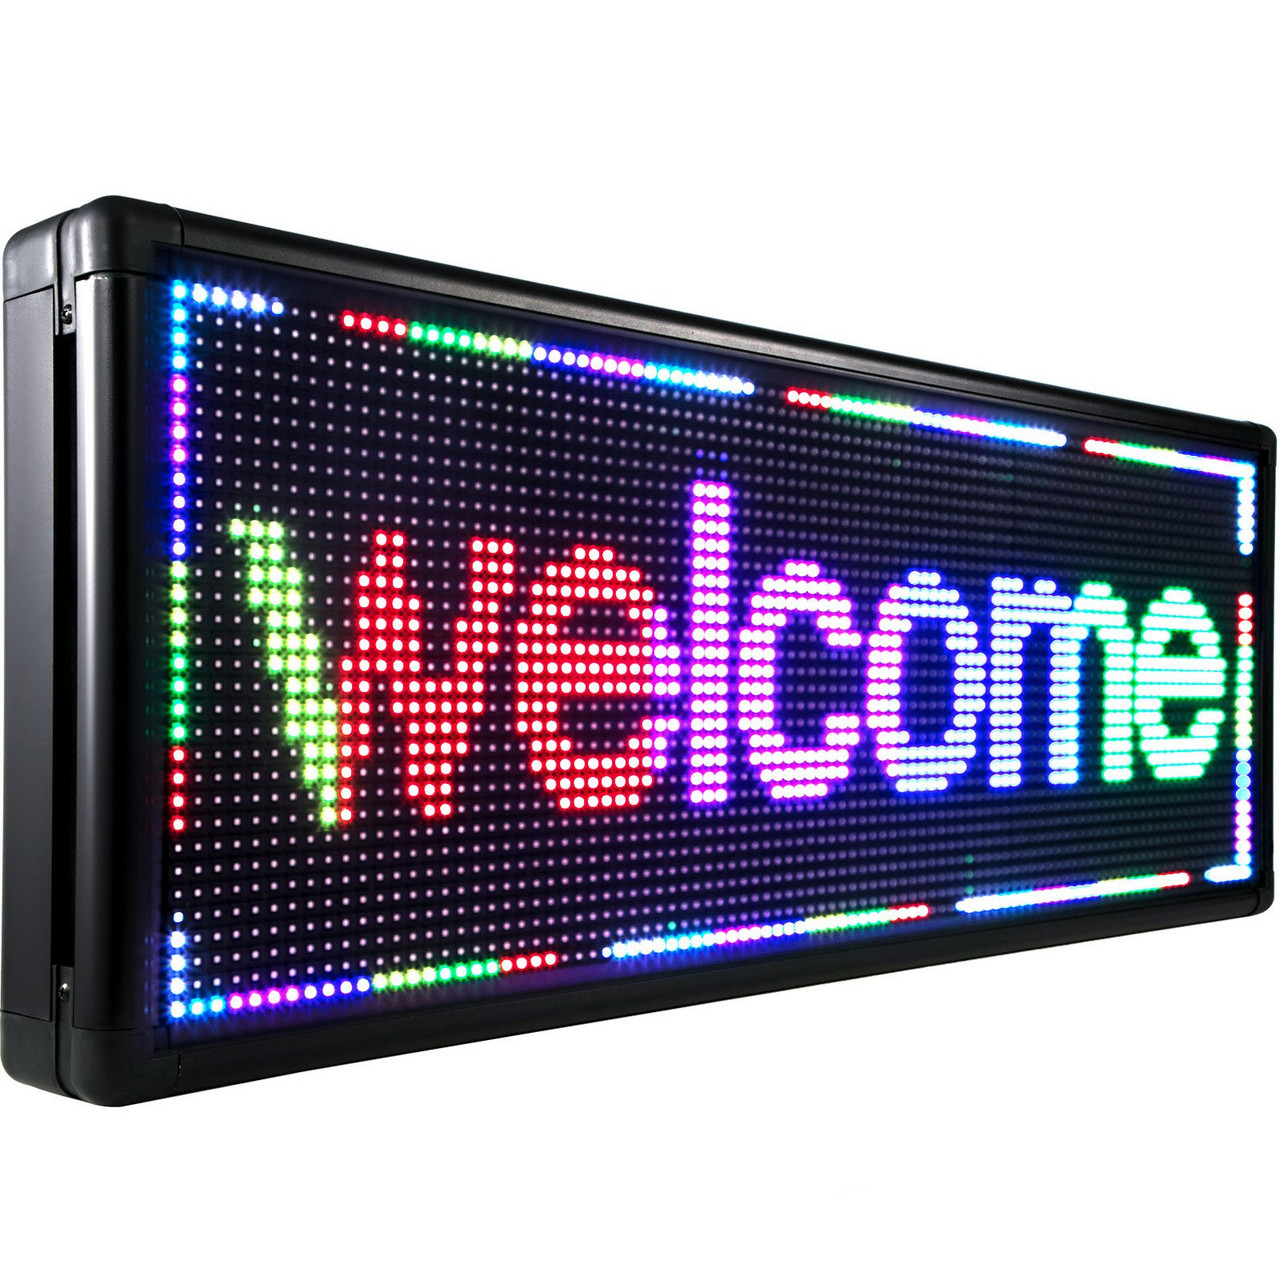 Led Sign 40" x 15" Digital Sign Full Color Color Indoor with high Resolution P10 Led Scrolling Display Programmable by PC & WiFi & USB for Advertising